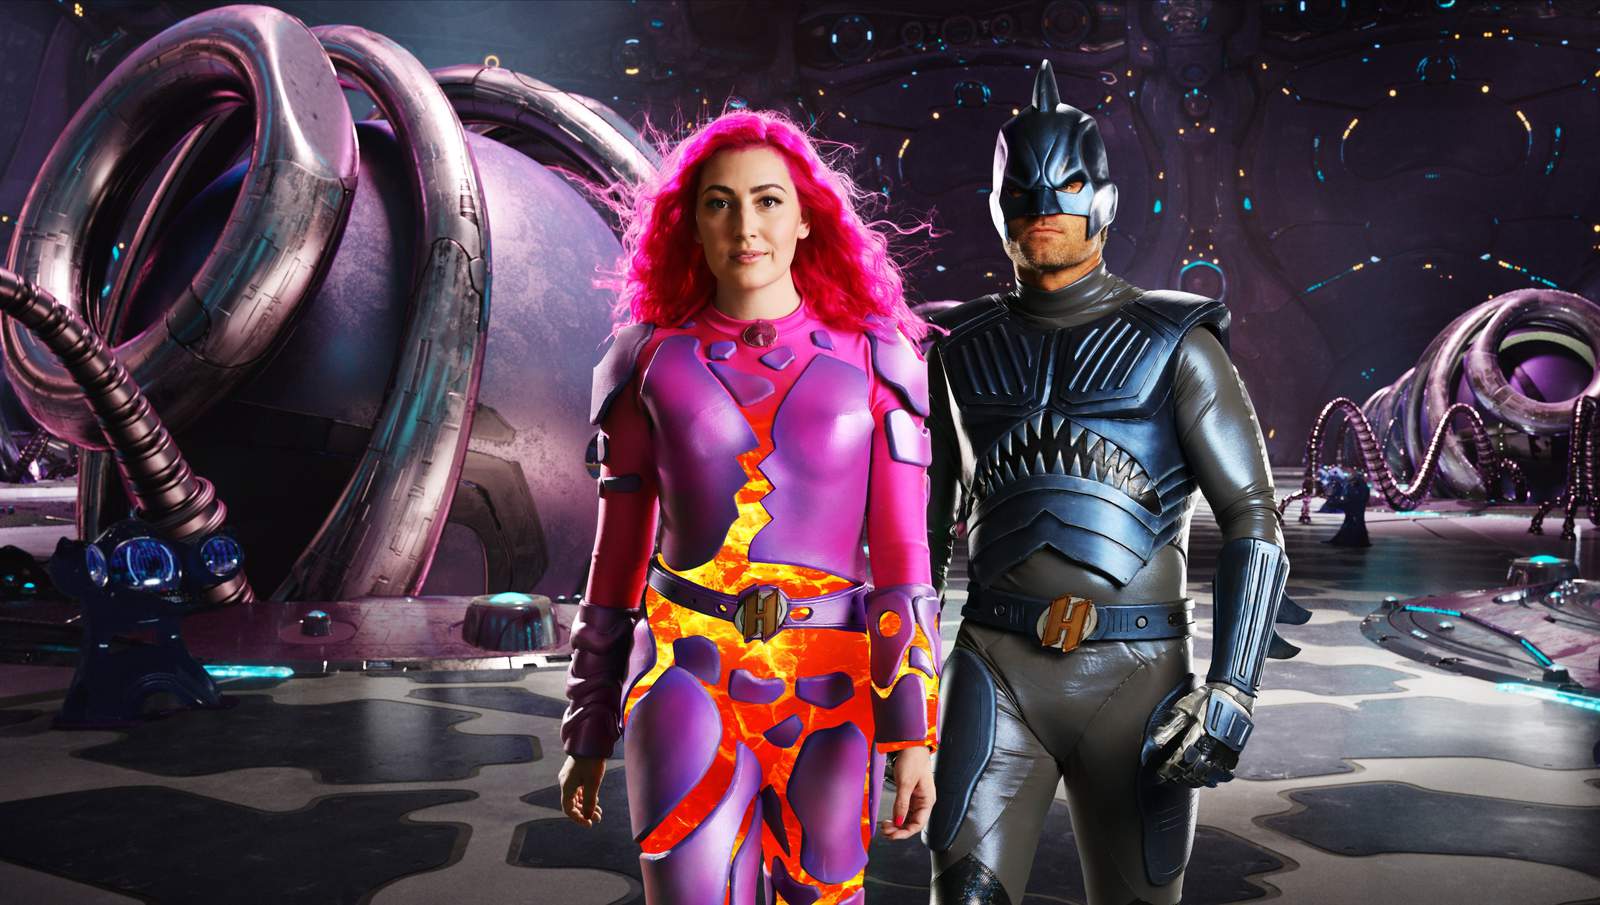 Sharkboy and Lavagirl become parents in new Netflix sequel, ‘We Can Be Heroes’